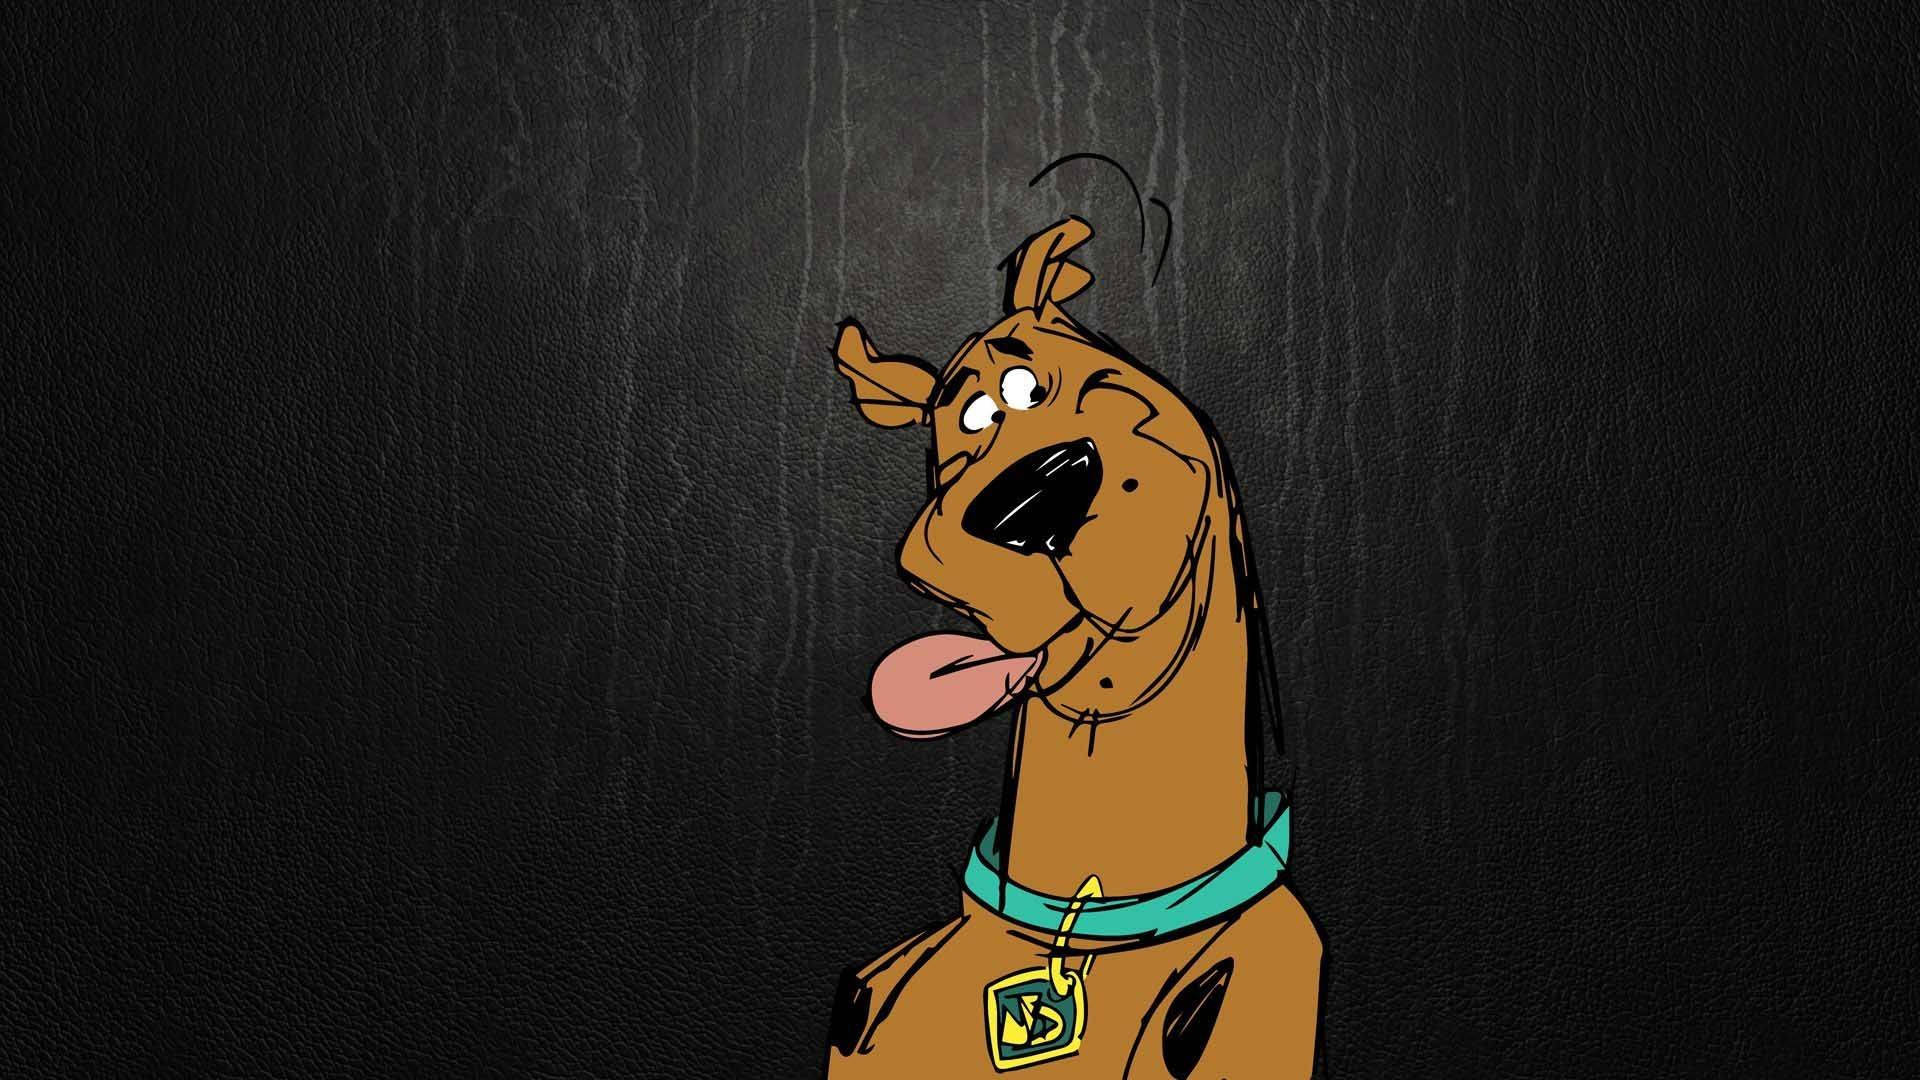 Top 999+ Scooby Doo Wallpaper Full HD, 4K✅Free to Use